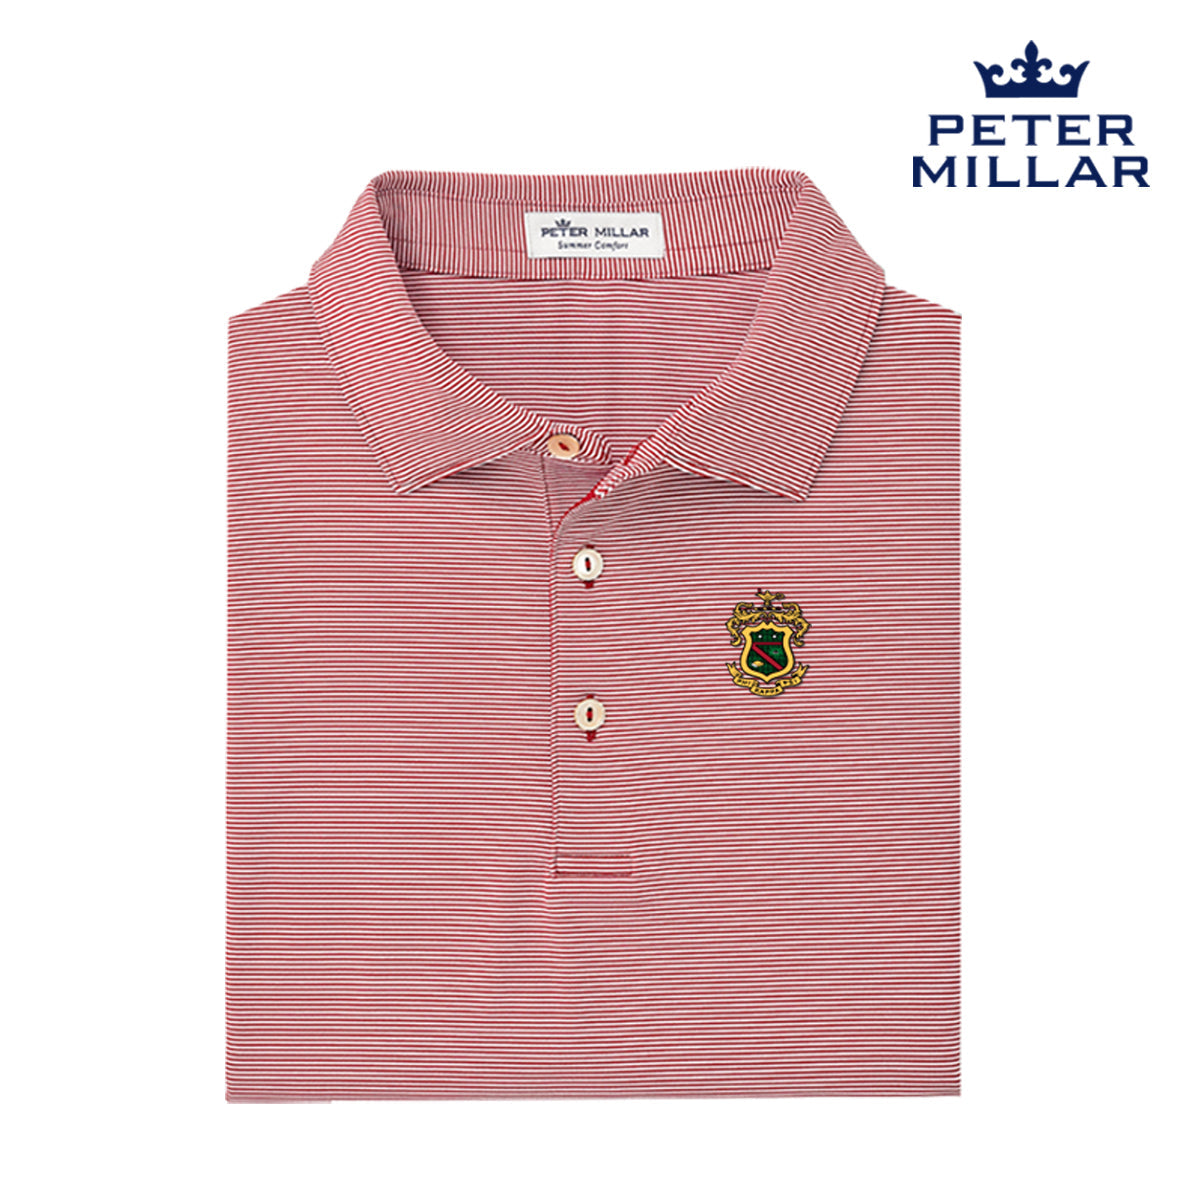 Phi Psi Peter Millar Jubilee Stripe Stretch Jersey Polo with Crest